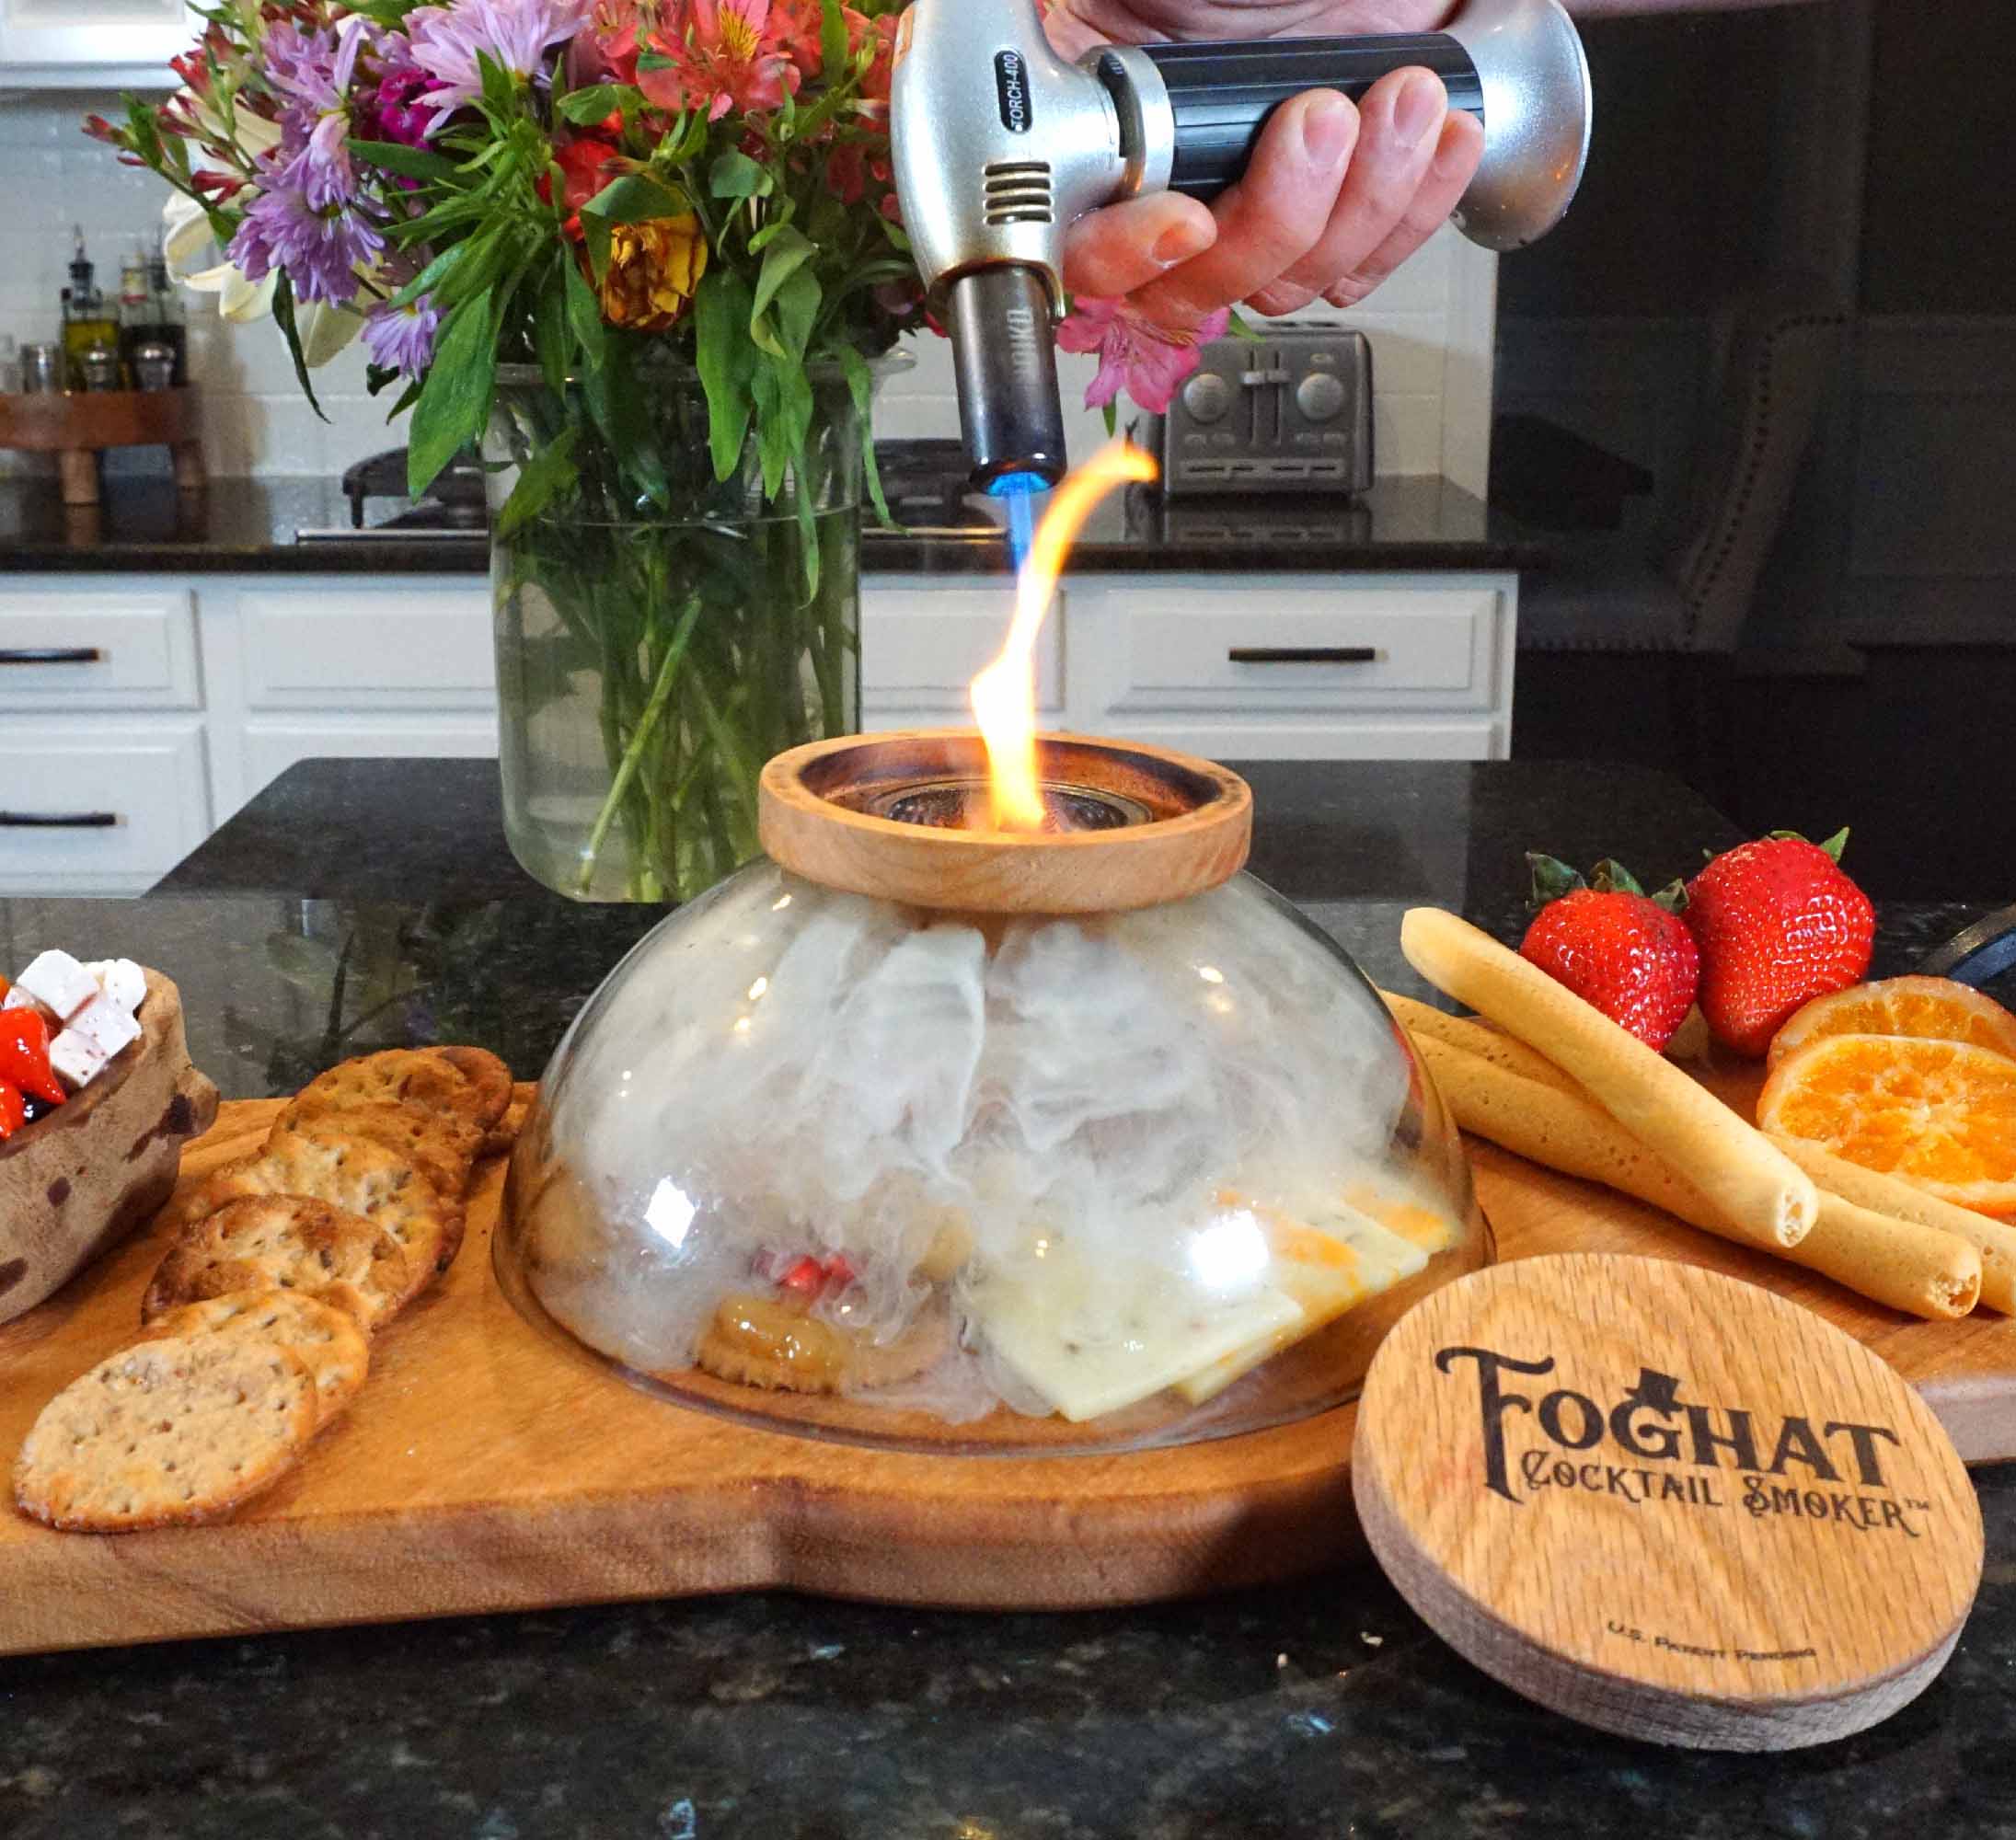 Foghat Smoked Charcuterie Set with Foghat Cocktail Smoker